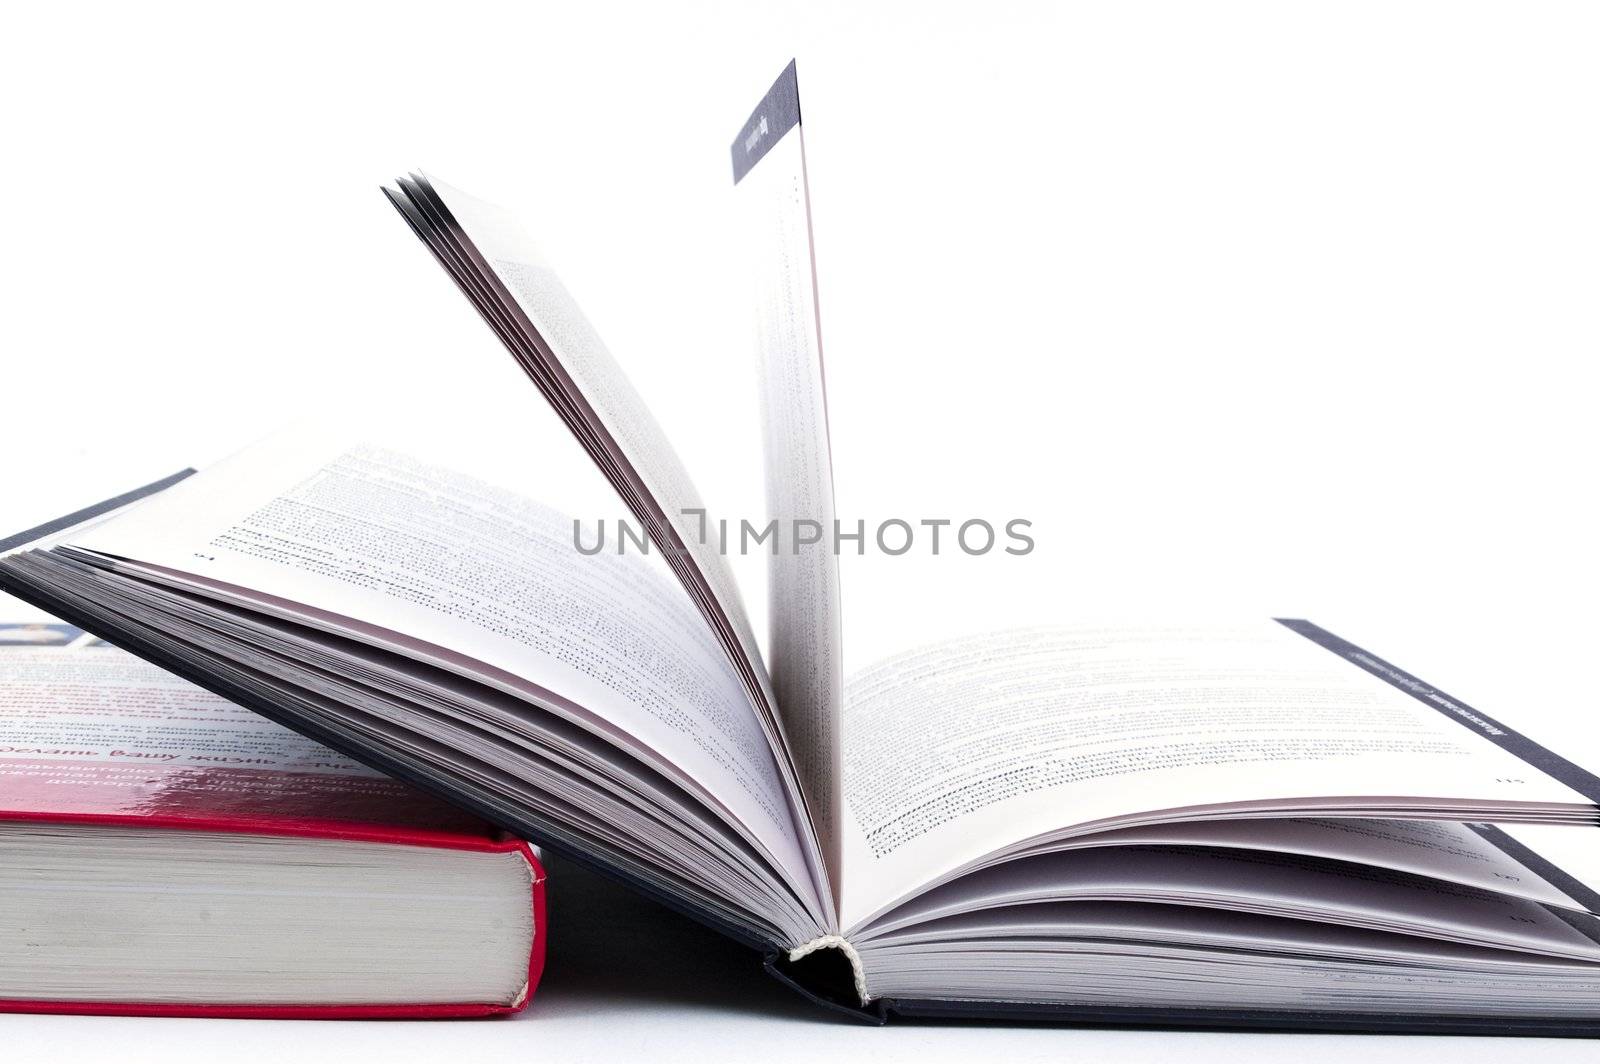 Turning pages of an empty white hardcover book by Triphka